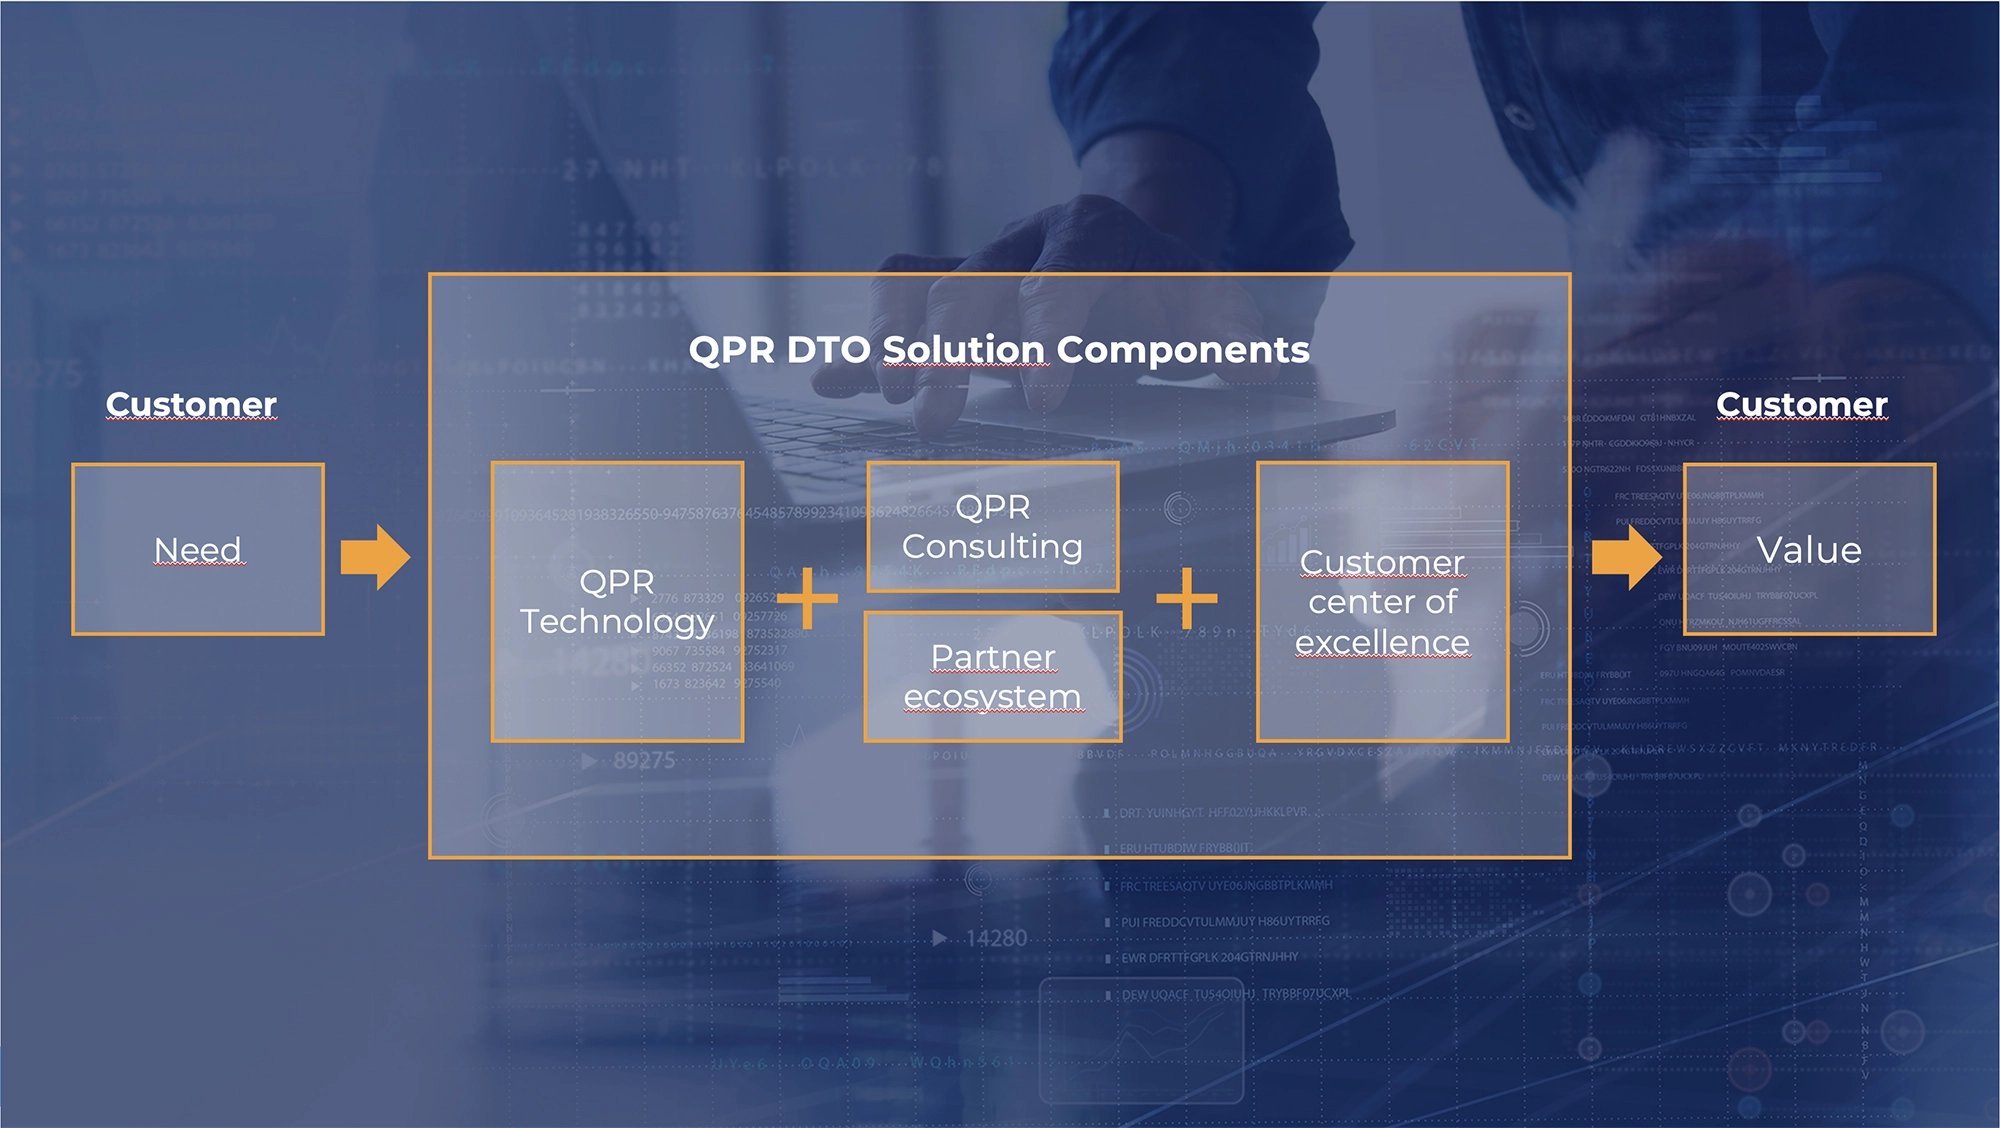 DTO-solution-delivery